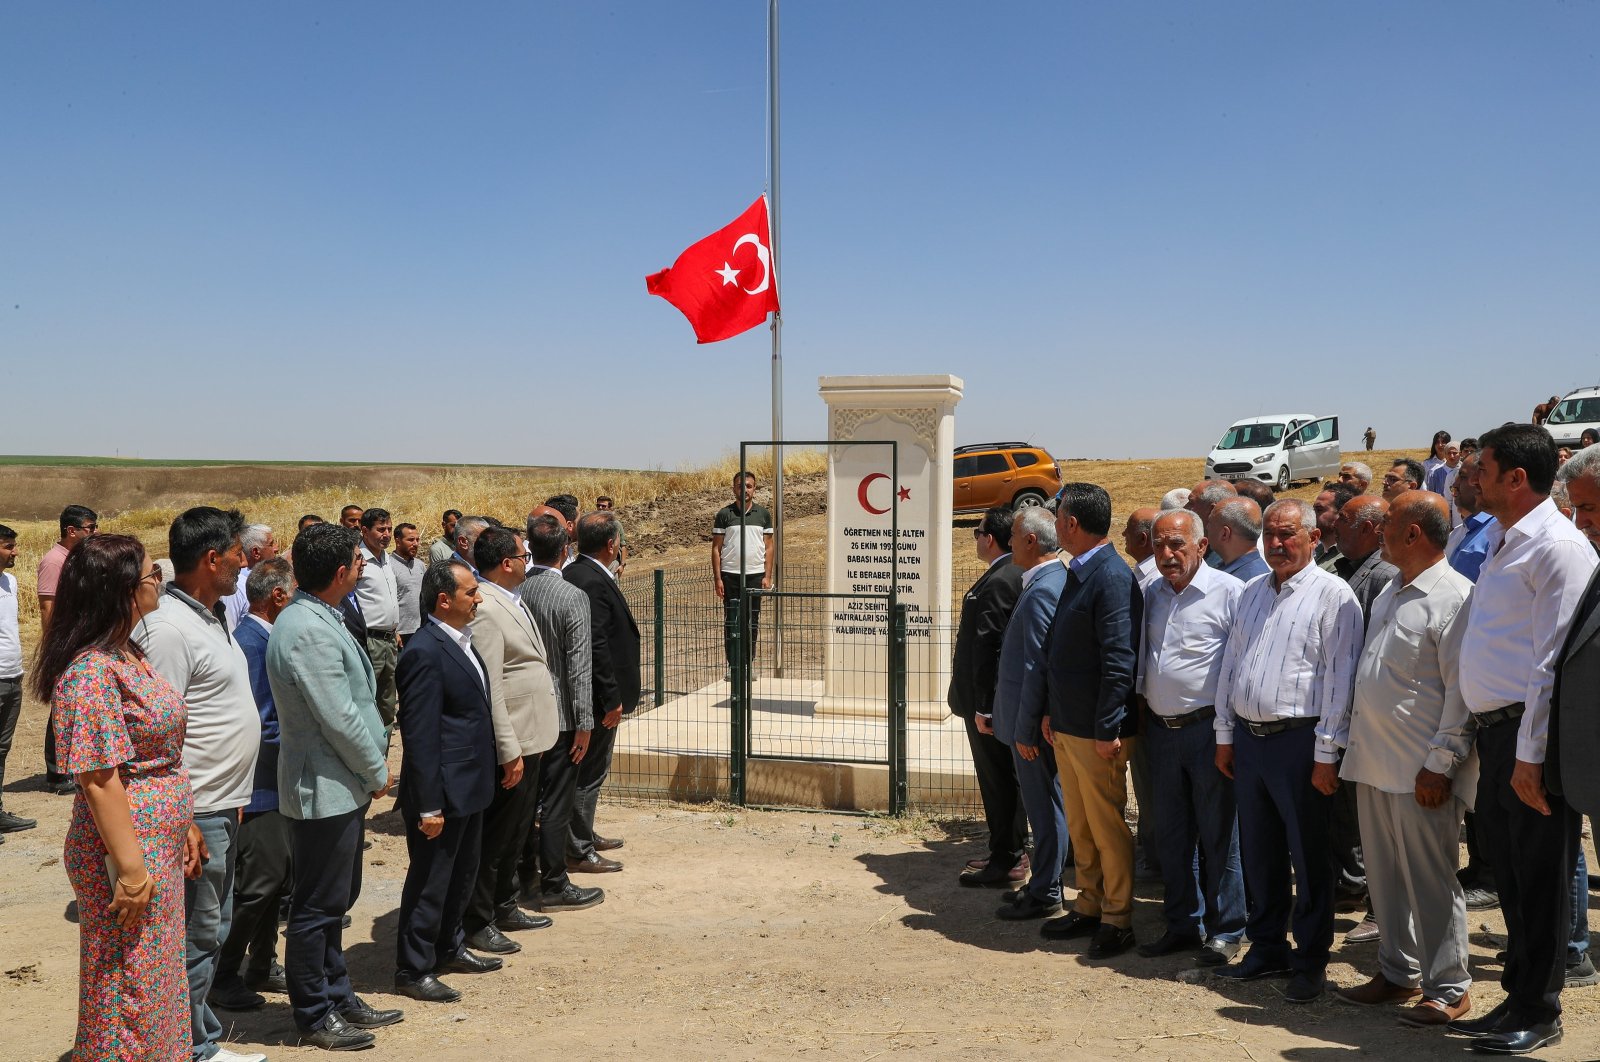 Citizens stand in silence to honor Neşe Alten, a teacher killed at 21 in a PKK attack 31 years ago, as they inaugurate a memorial for her, in Bismil district of southeastern Diyarbakır, Türkiye, June 14, 2024. (AA Photo)